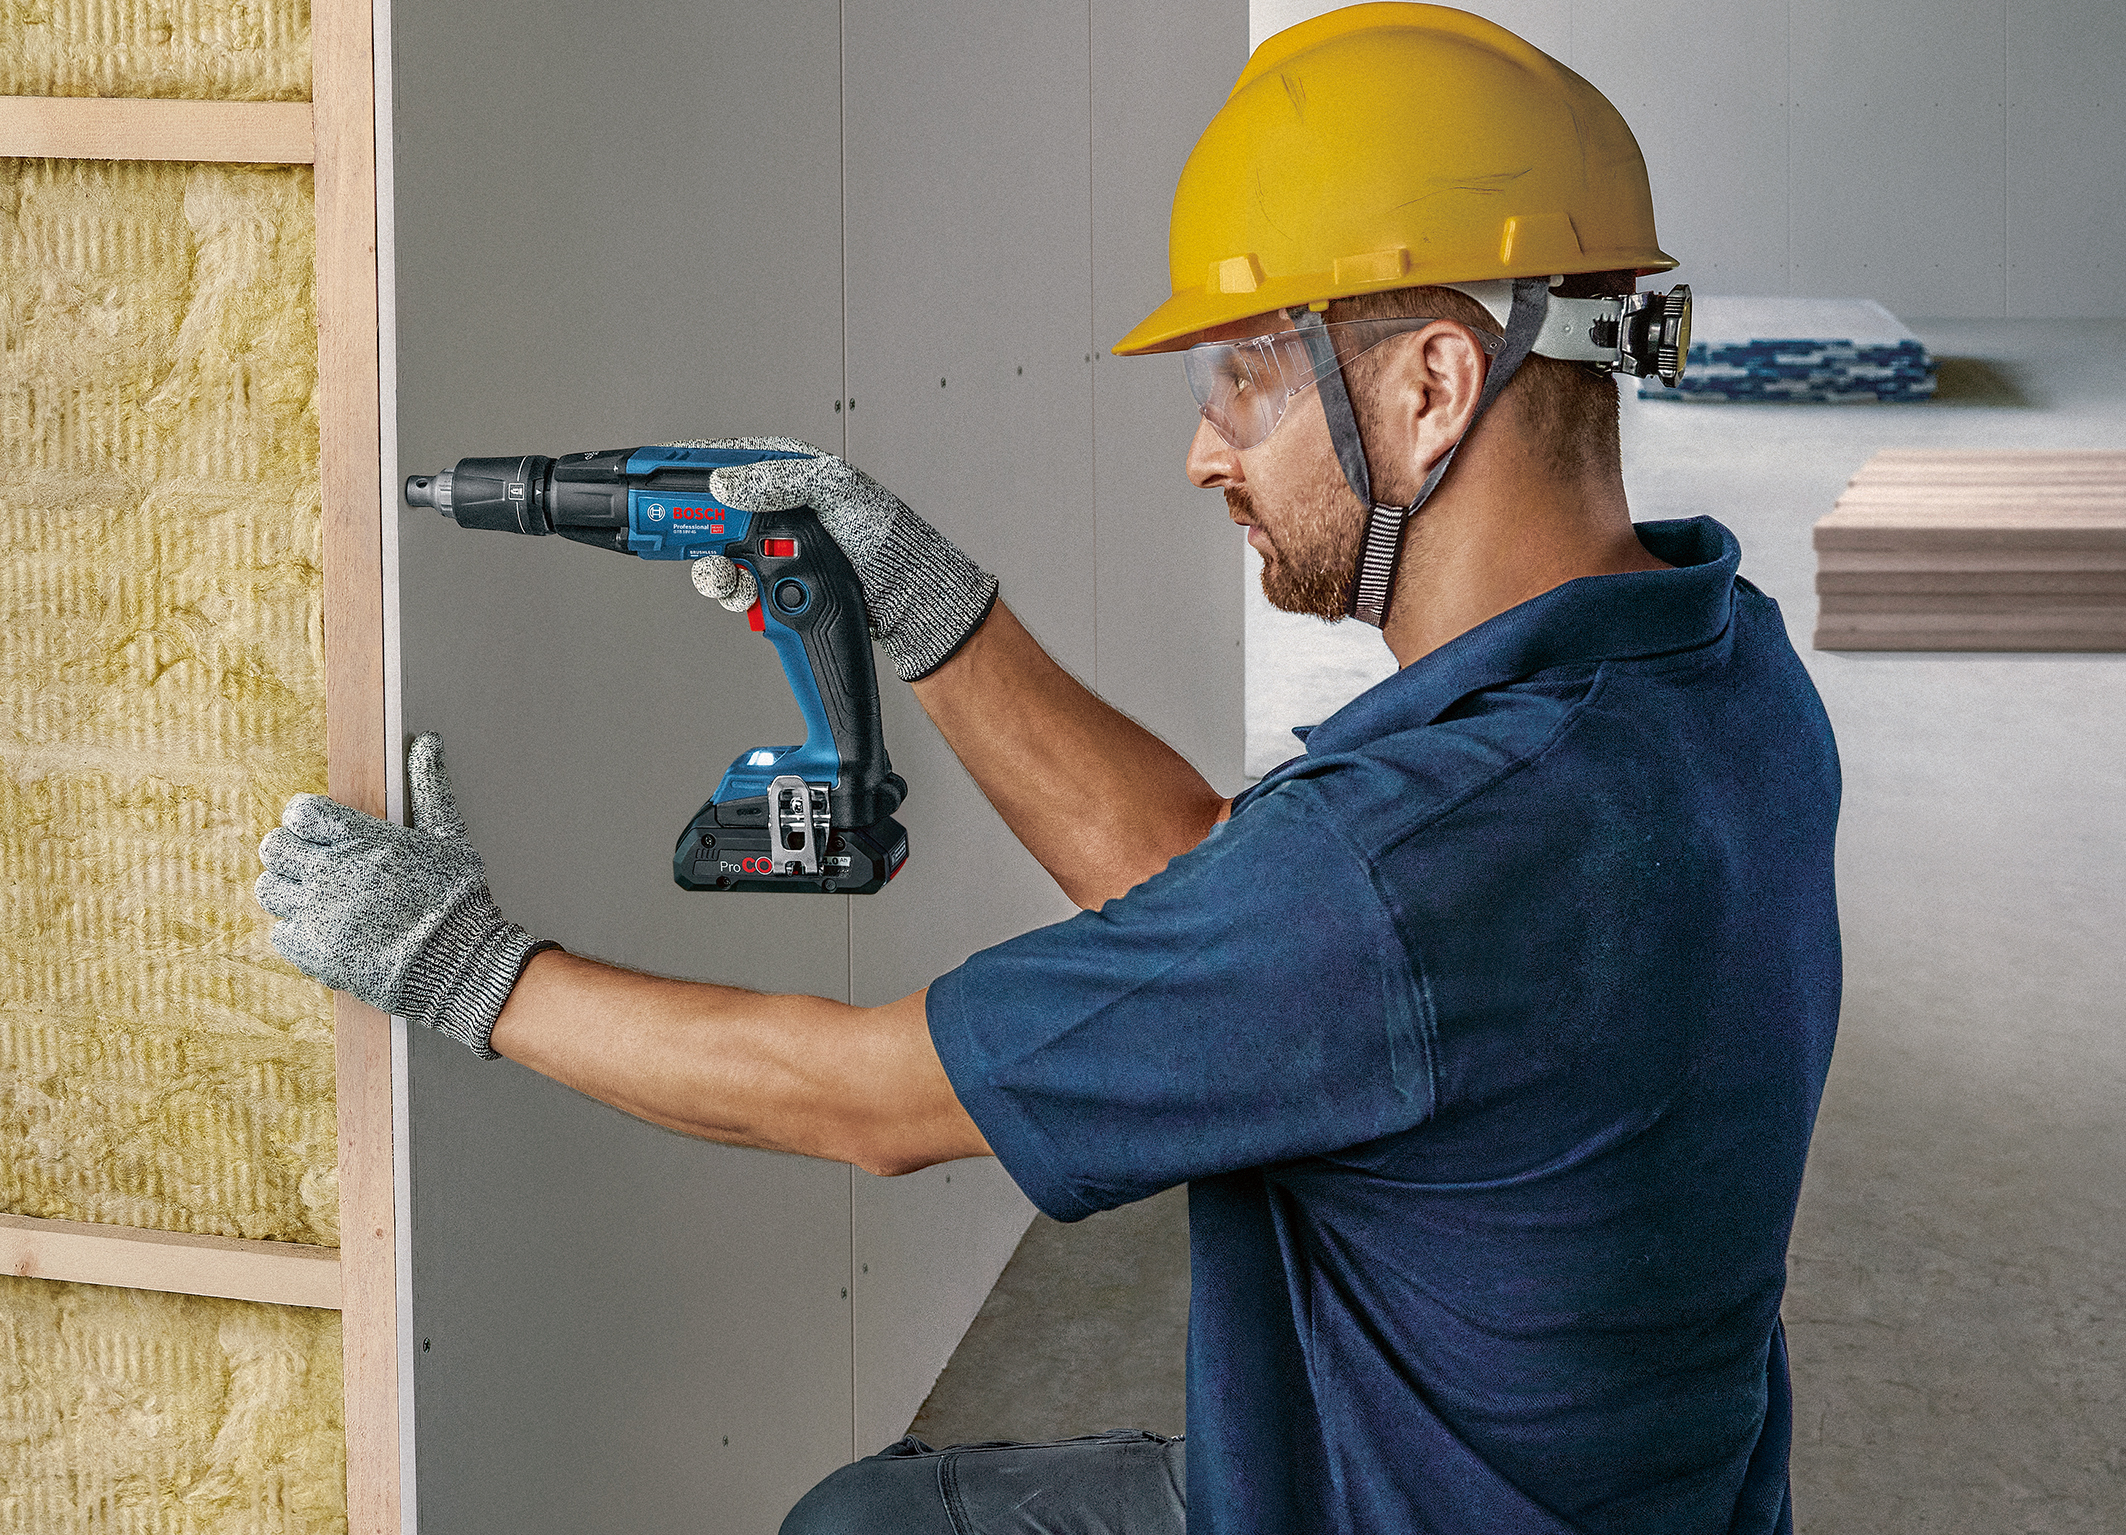 Efficient, ergonomic, better for the body: Three Bosch innovations for  drywall professionals - Bosch Media Service